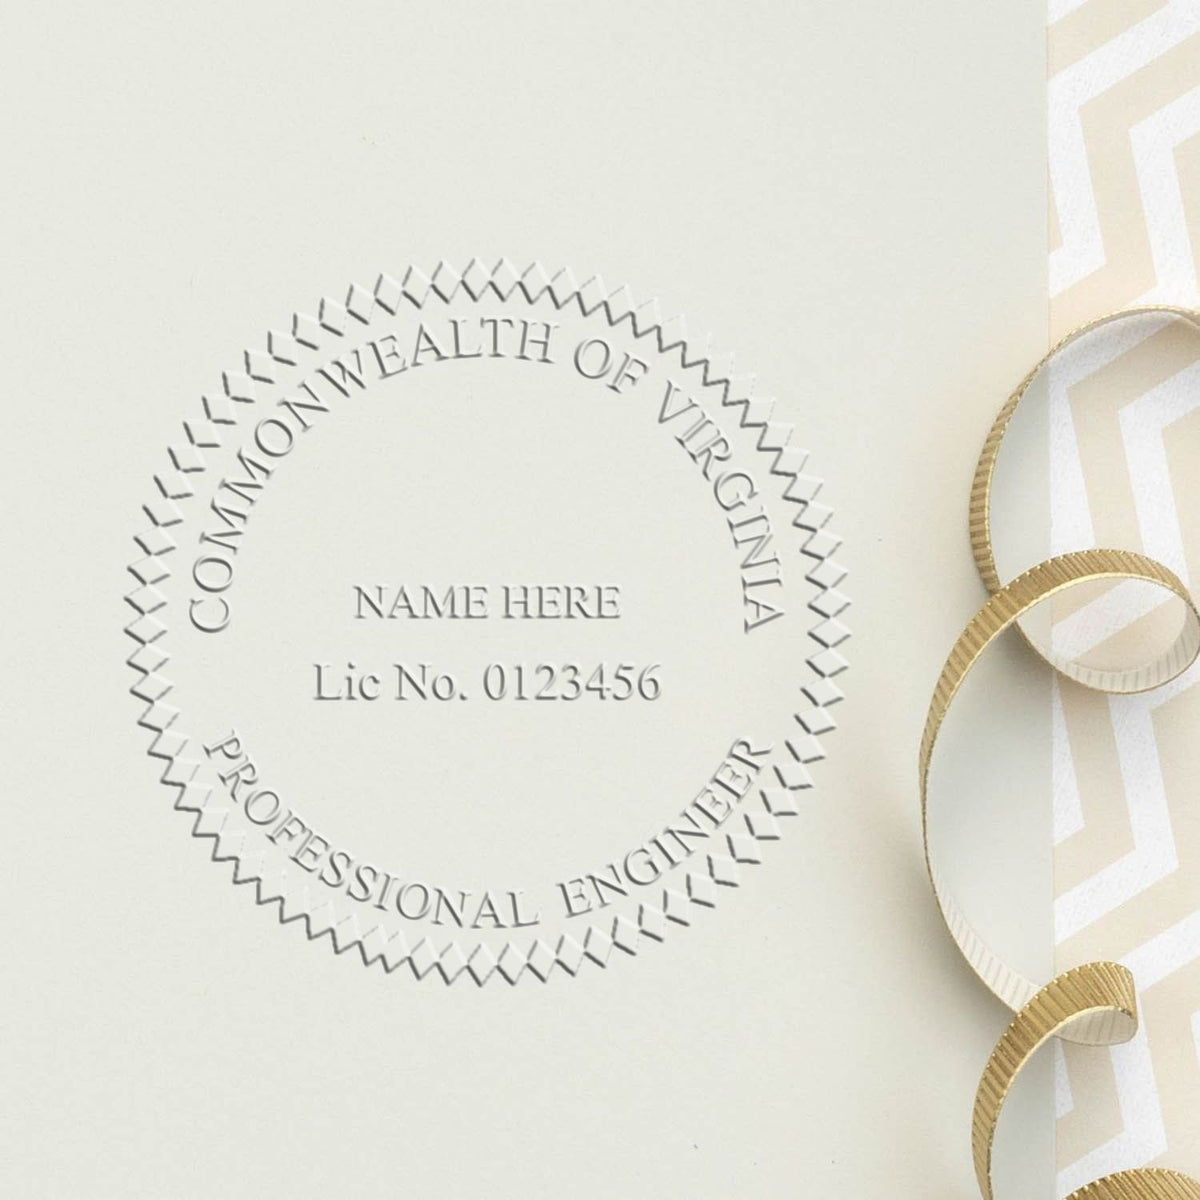 A stamped imprint of the Gift Virginia Engineer Seal in this stylish lifestyle photo, setting the tone for a unique and personalized product.